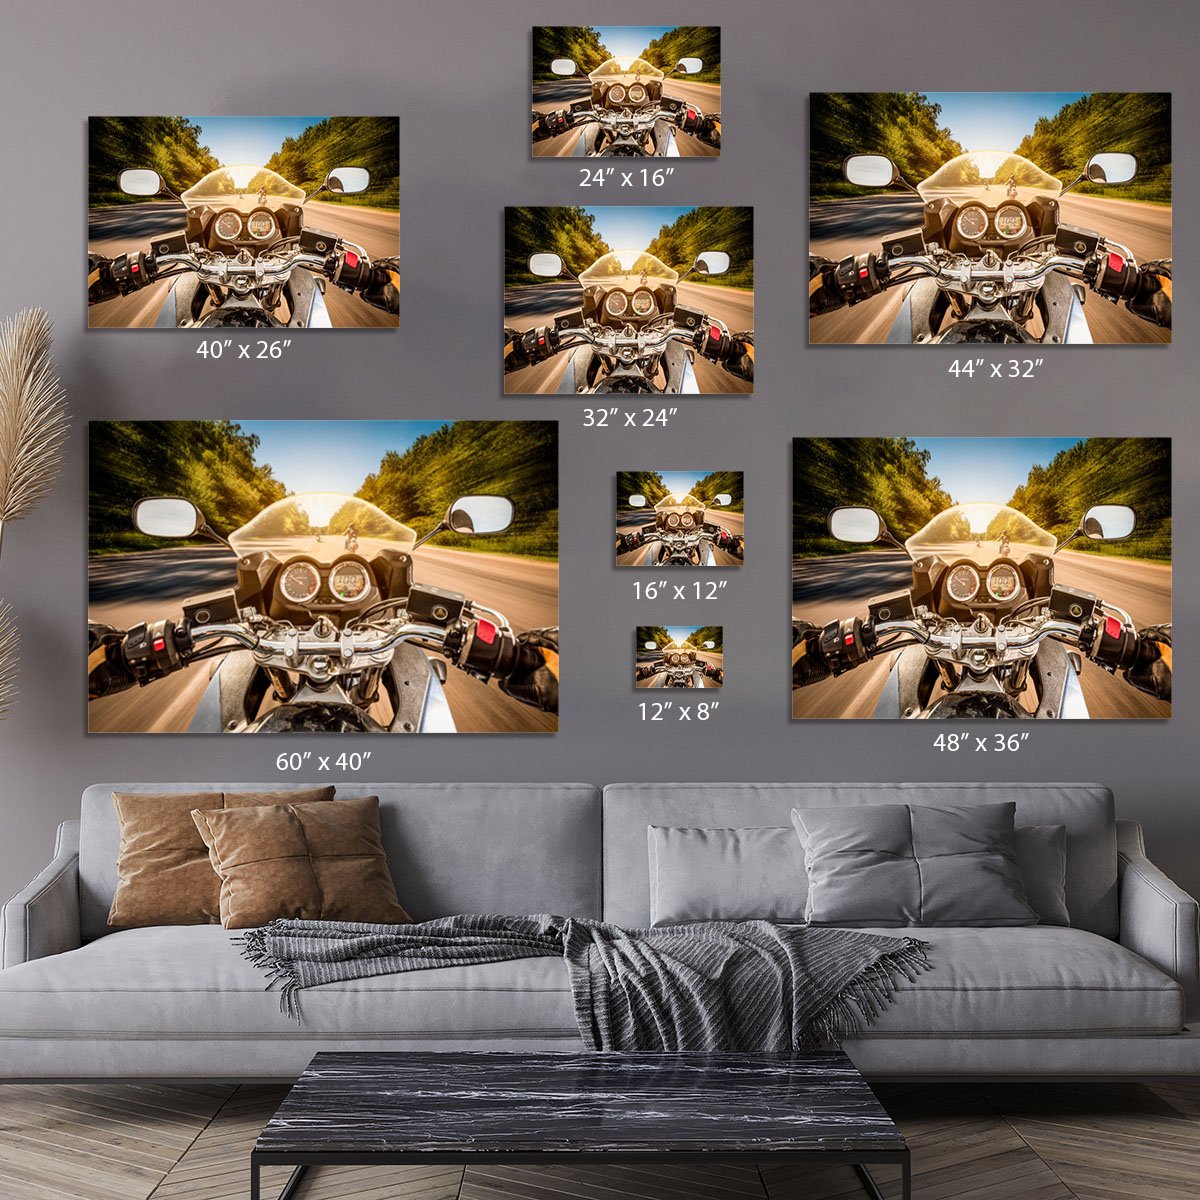 First Person Motorbike Ride Canvas Print or Poster